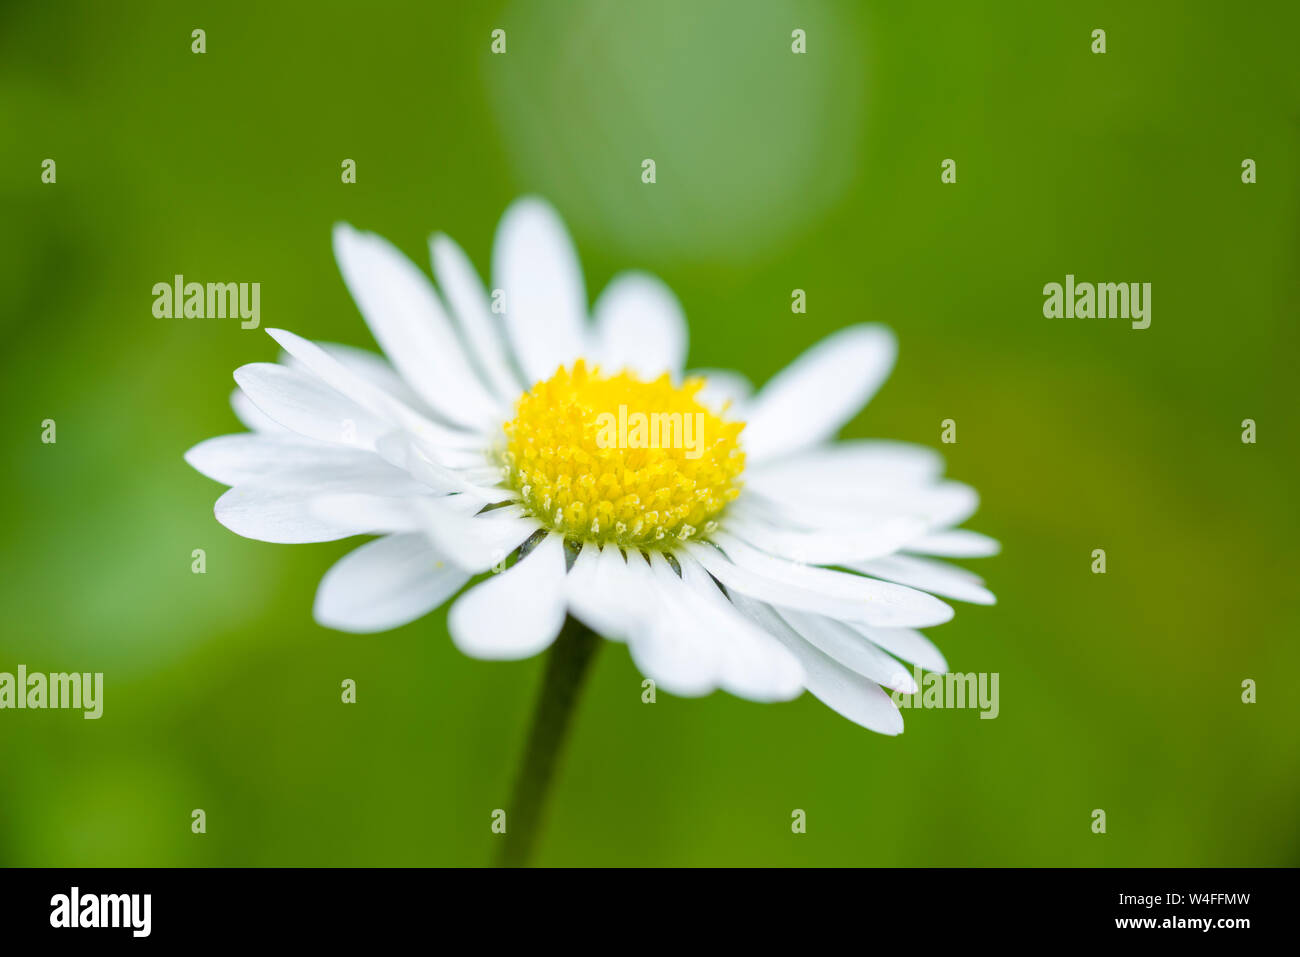 A close-up of a common daisy (Bellis perennis). Stock Photo